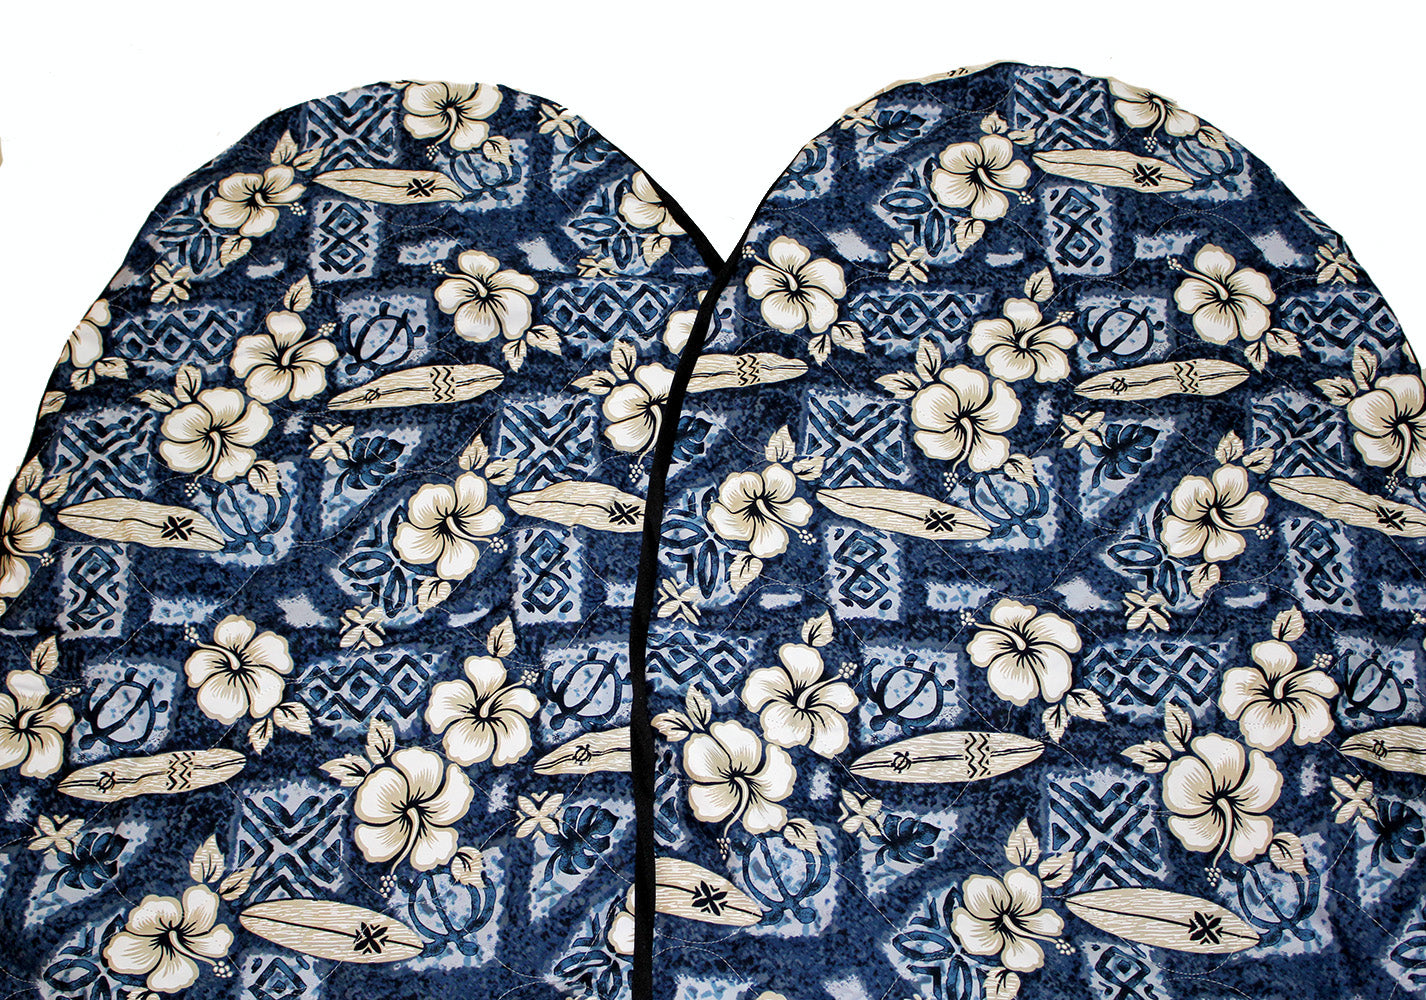 Hawaii car seat cover, #18 Blue surf board (quilted)